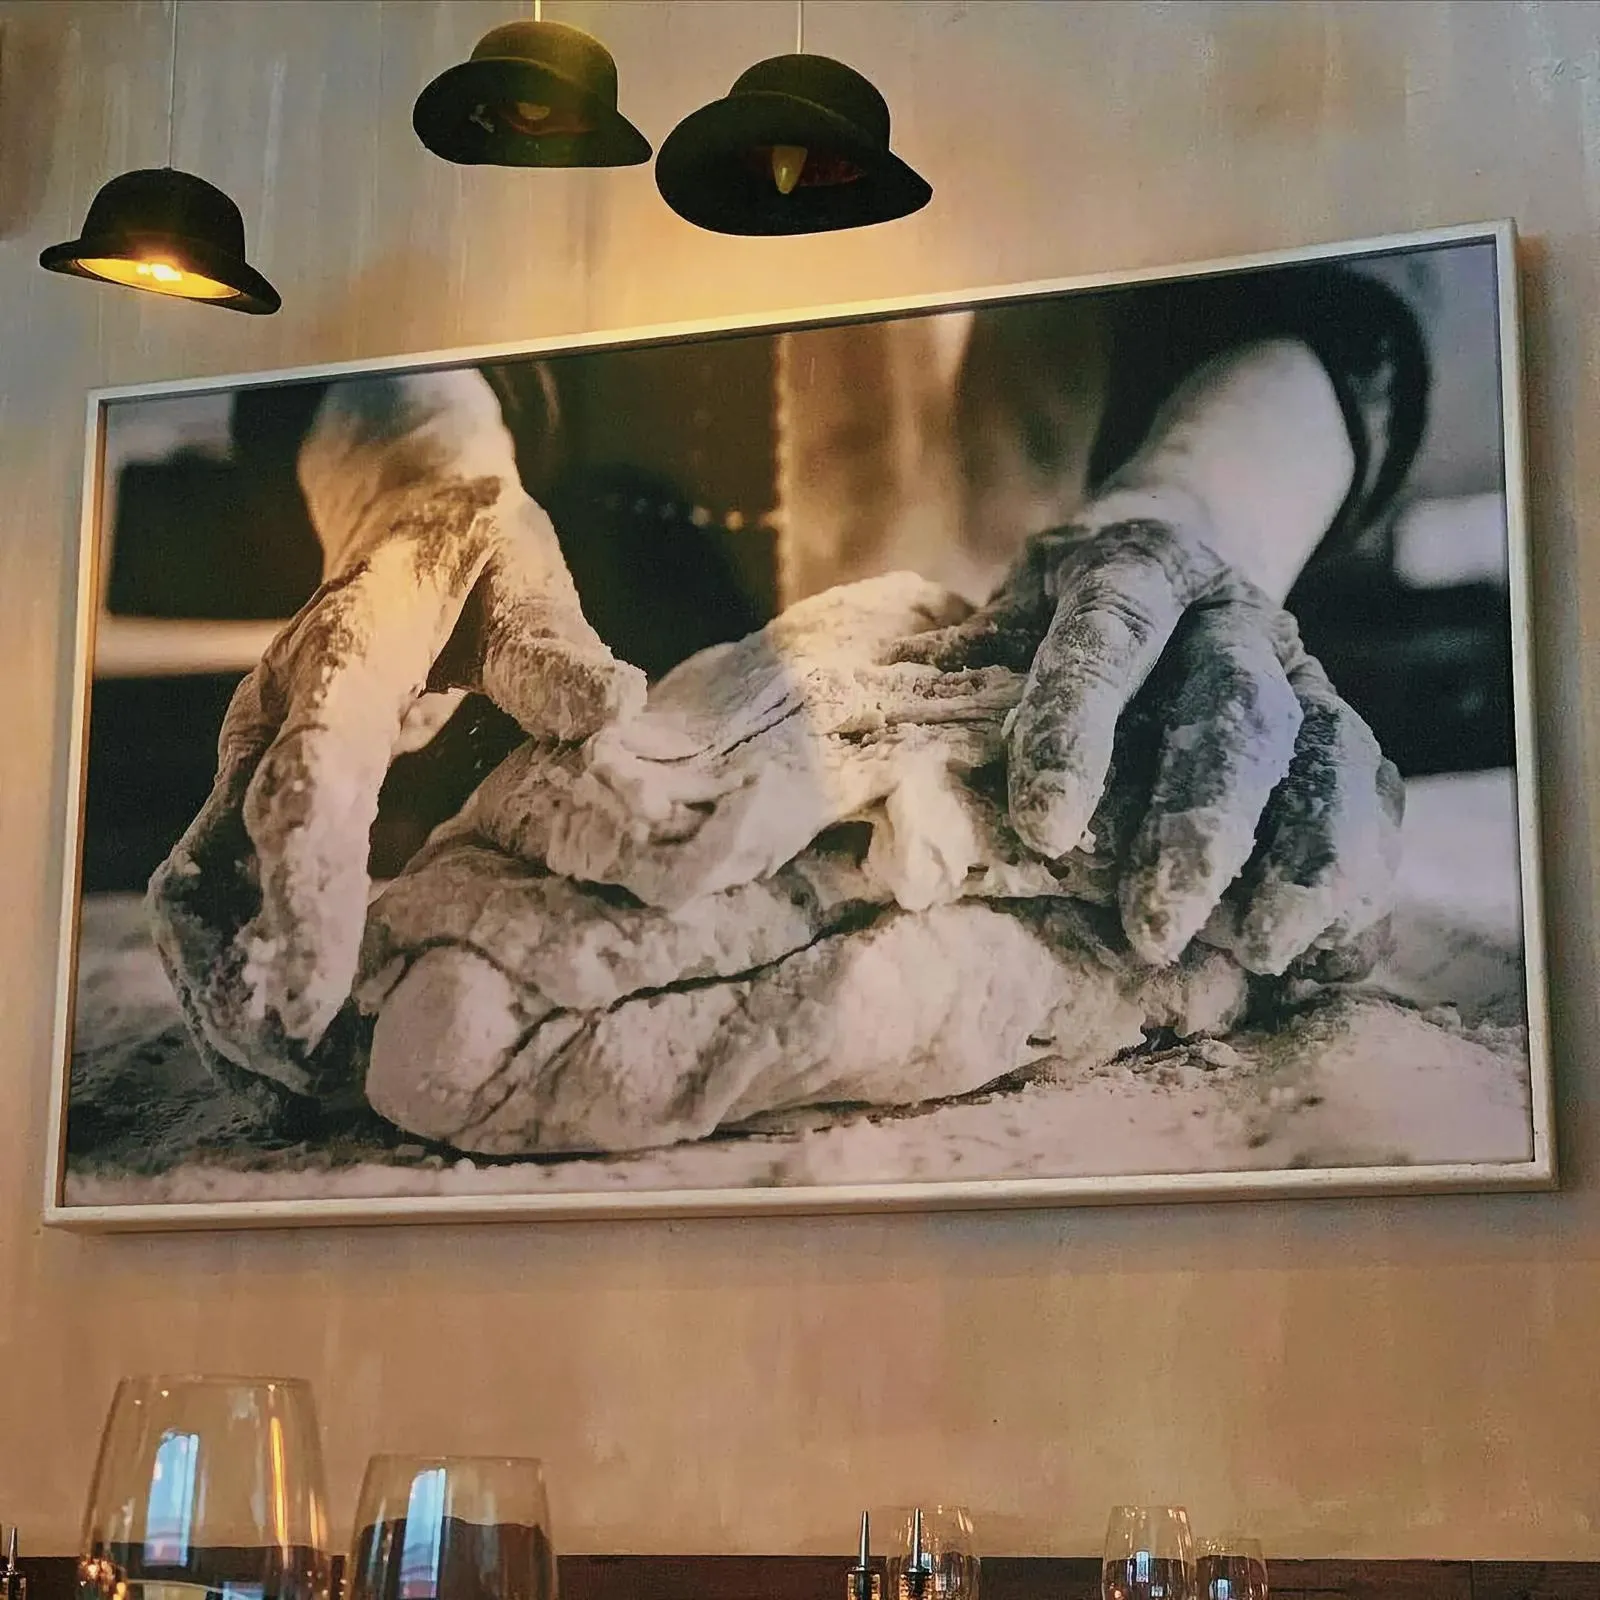 Intriguing indoor art display featuring a pair of hands